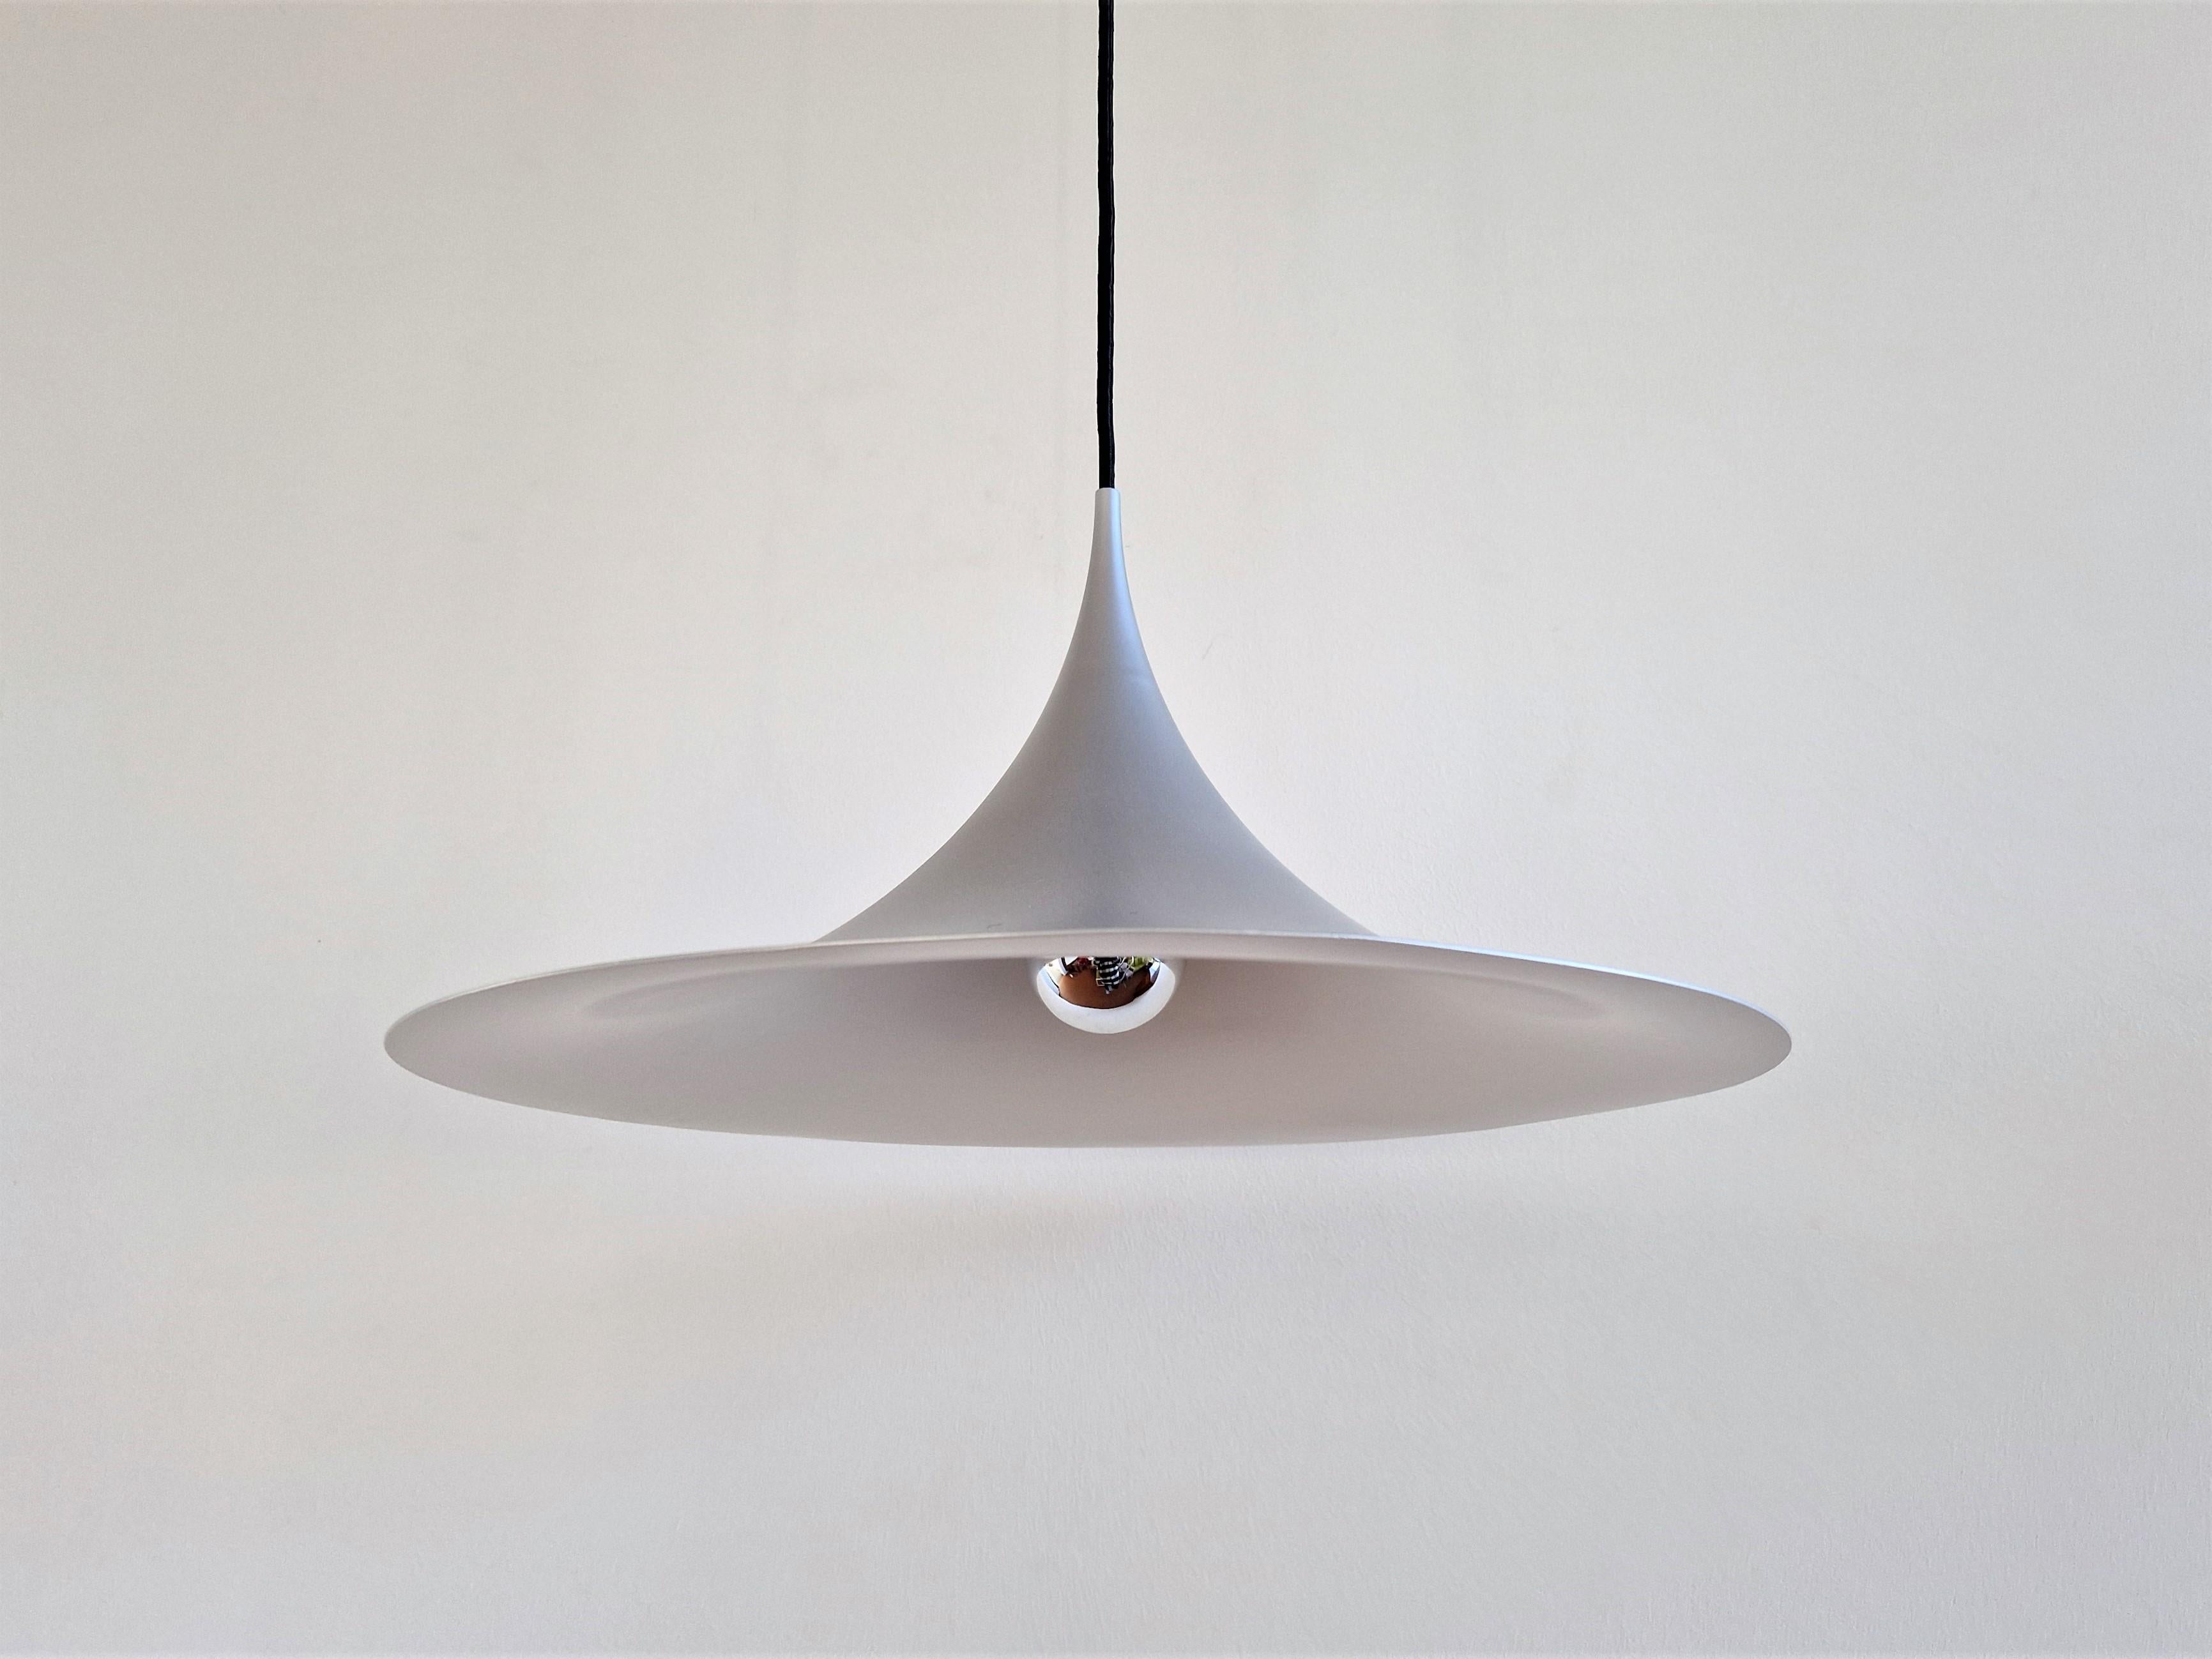 This famous model 'Semi' or 'witch hat' pendant lamp was designed by Claus Bonderup and Torsten Thorup for Fog & Mørup in 1968. An iconic pendant that is a true example of a timeless design. This piece has a diameter of 47 cm and is recently